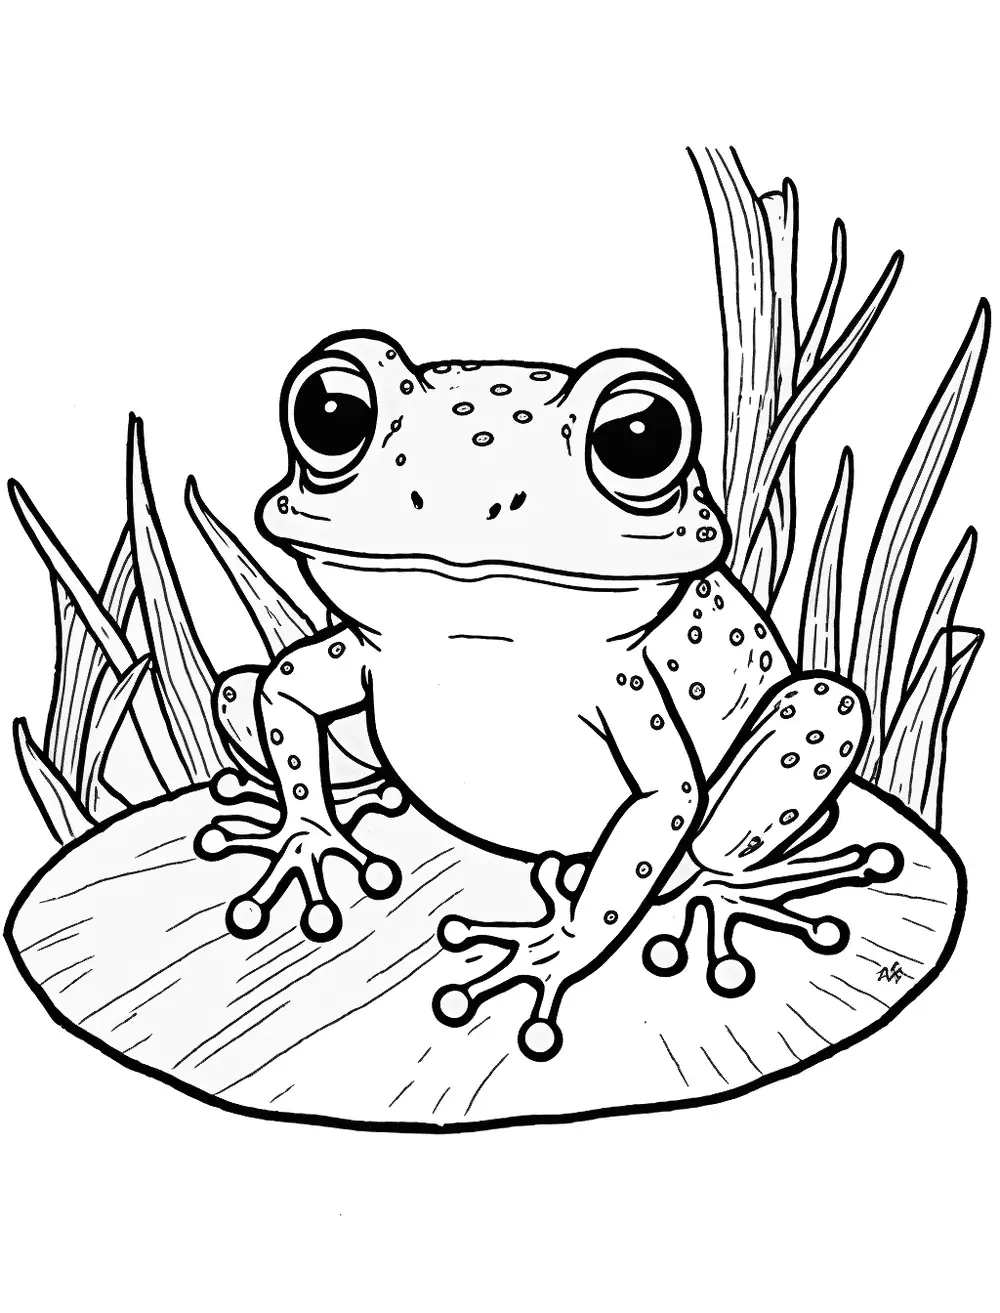 Small Baby Frog Coloring Page - A tiny, newly hatched frog